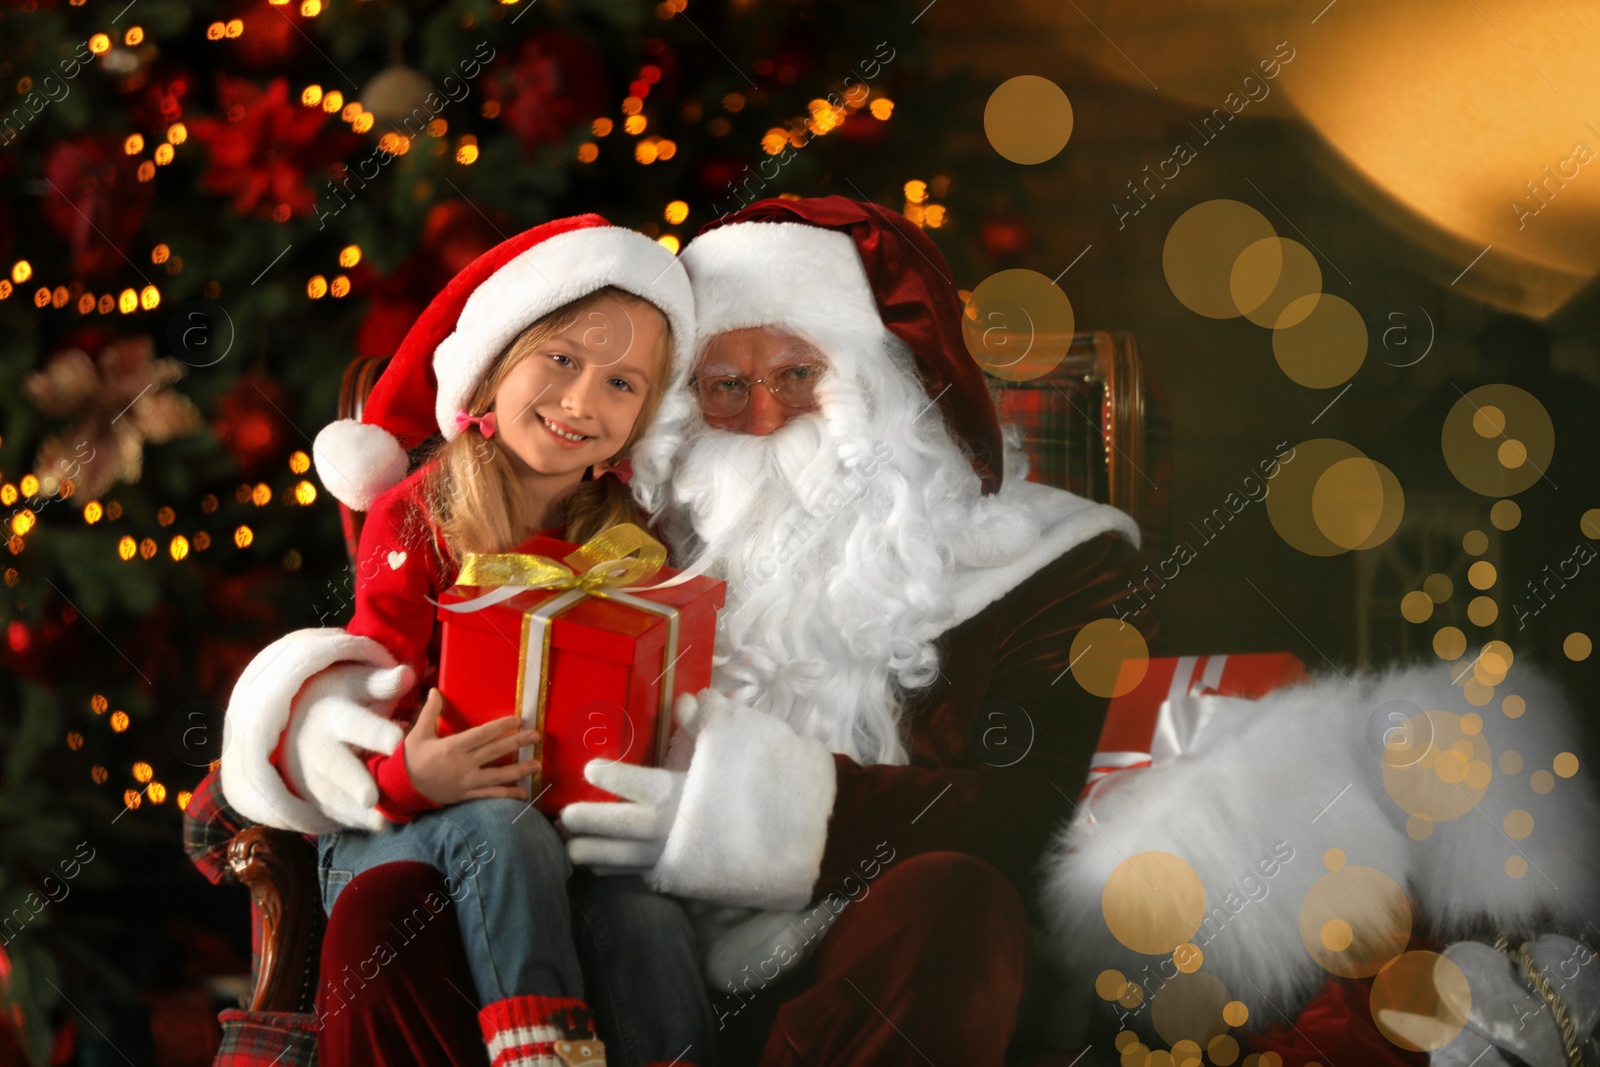 Photo of Santa Claus and little girl with gift near Christmas tree indoors